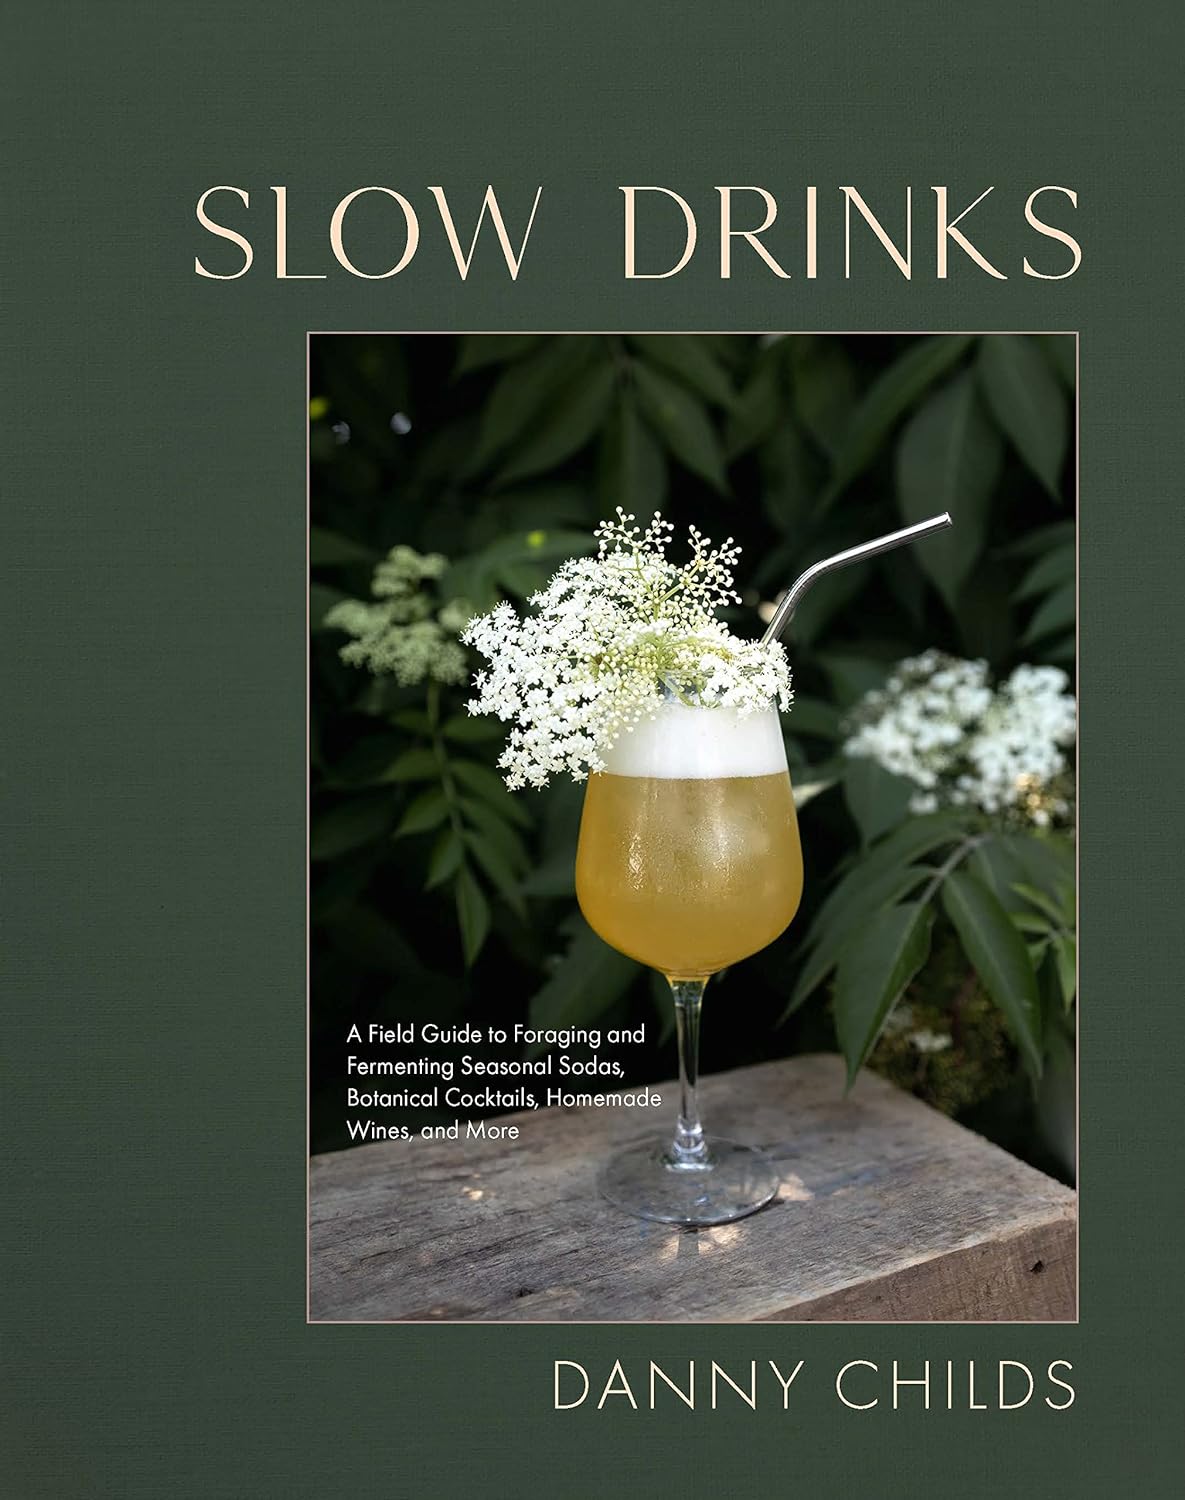 Slow Drinks (Danny Childs, Katie Childs)